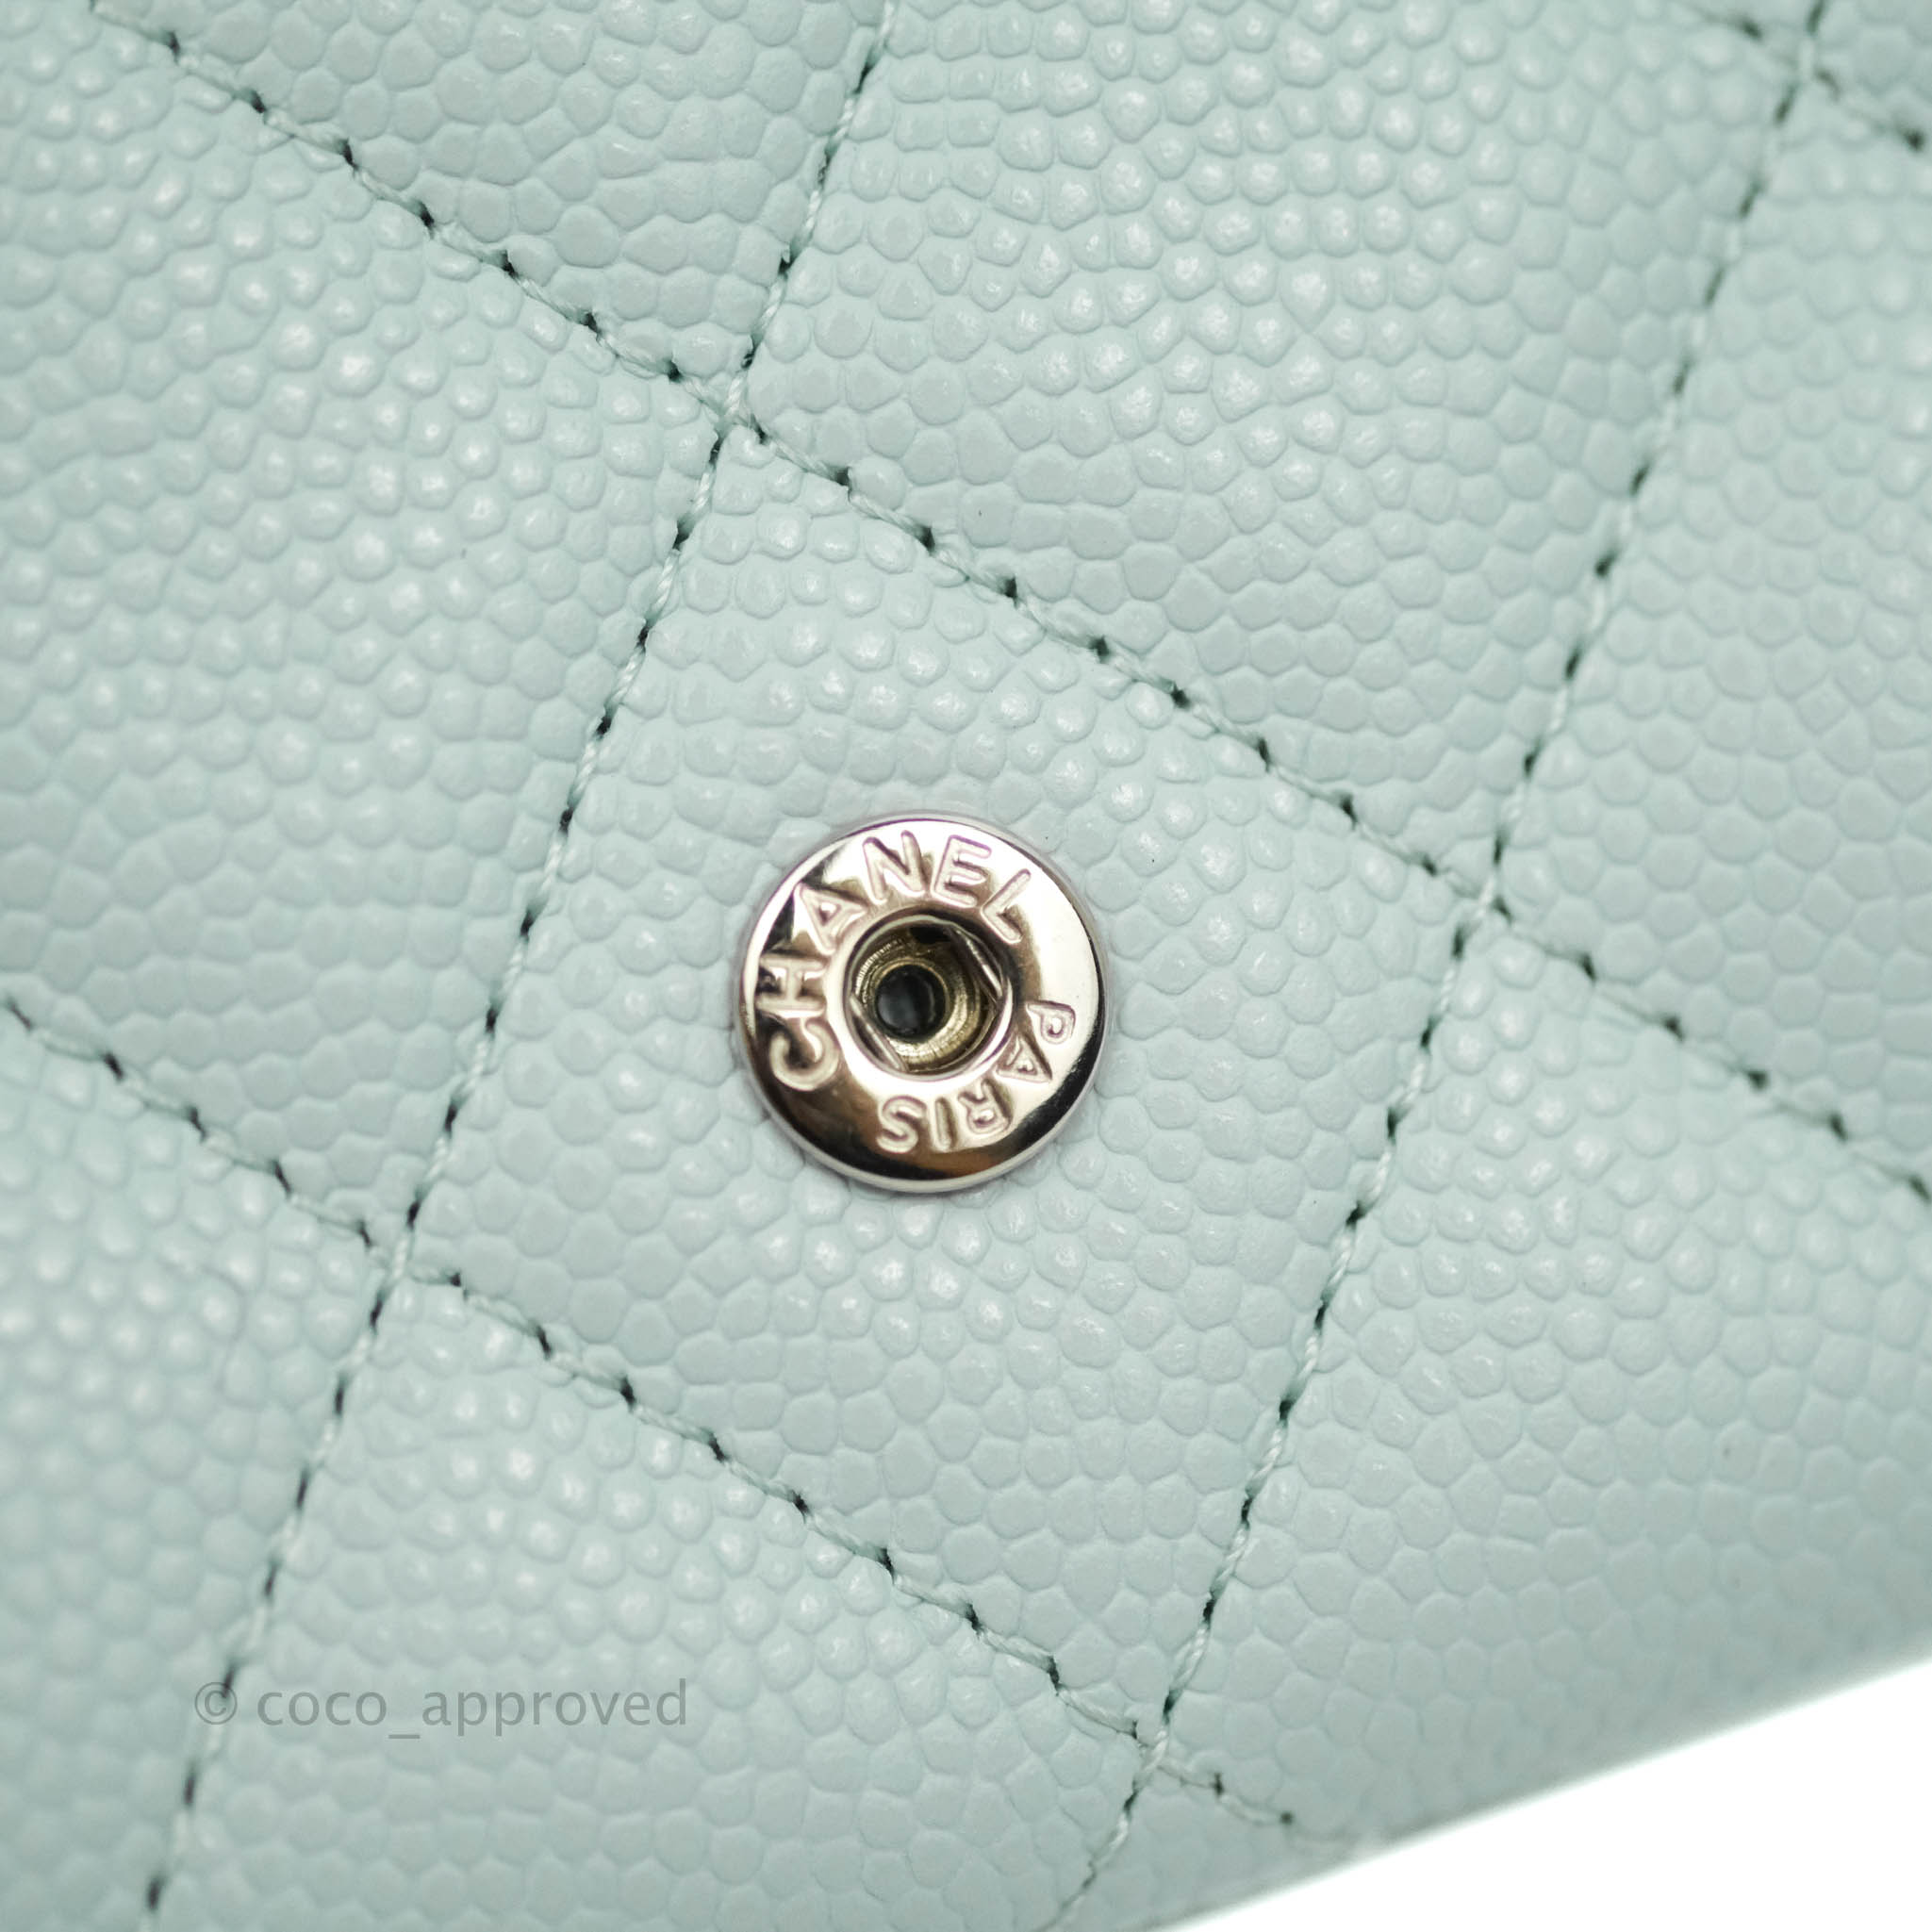 Chanel Quilted Classic Flap Card Holder Pale Mint Caviar Silver